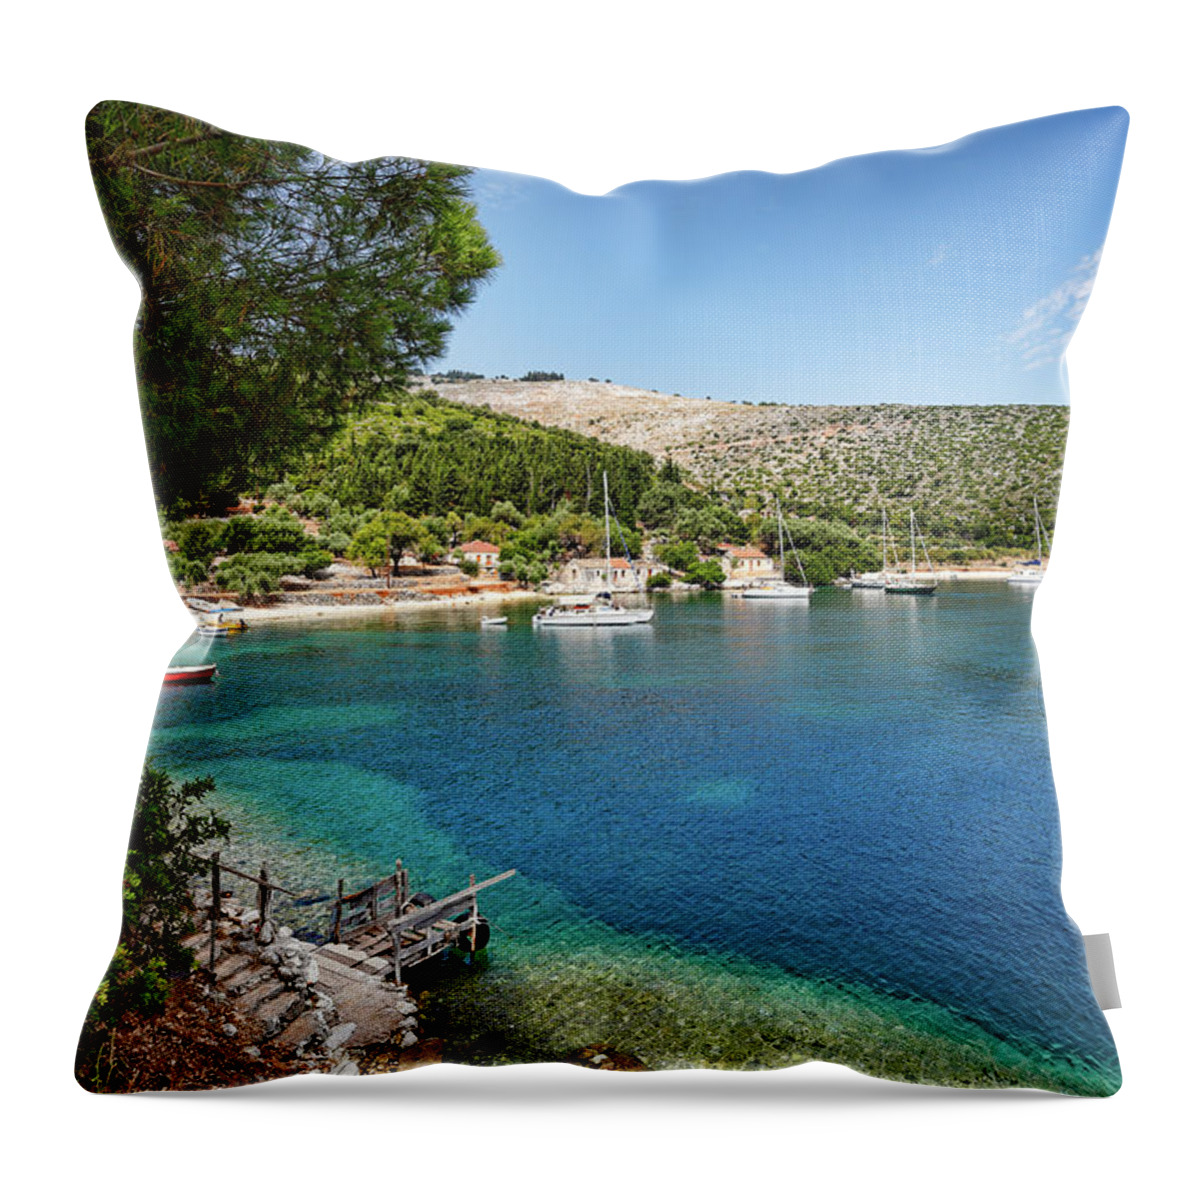 Agia Throw Pillow featuring the photograph Agia Sofia and Plati Limani in Kefalonia, Greece by Constantinos Iliopoulos